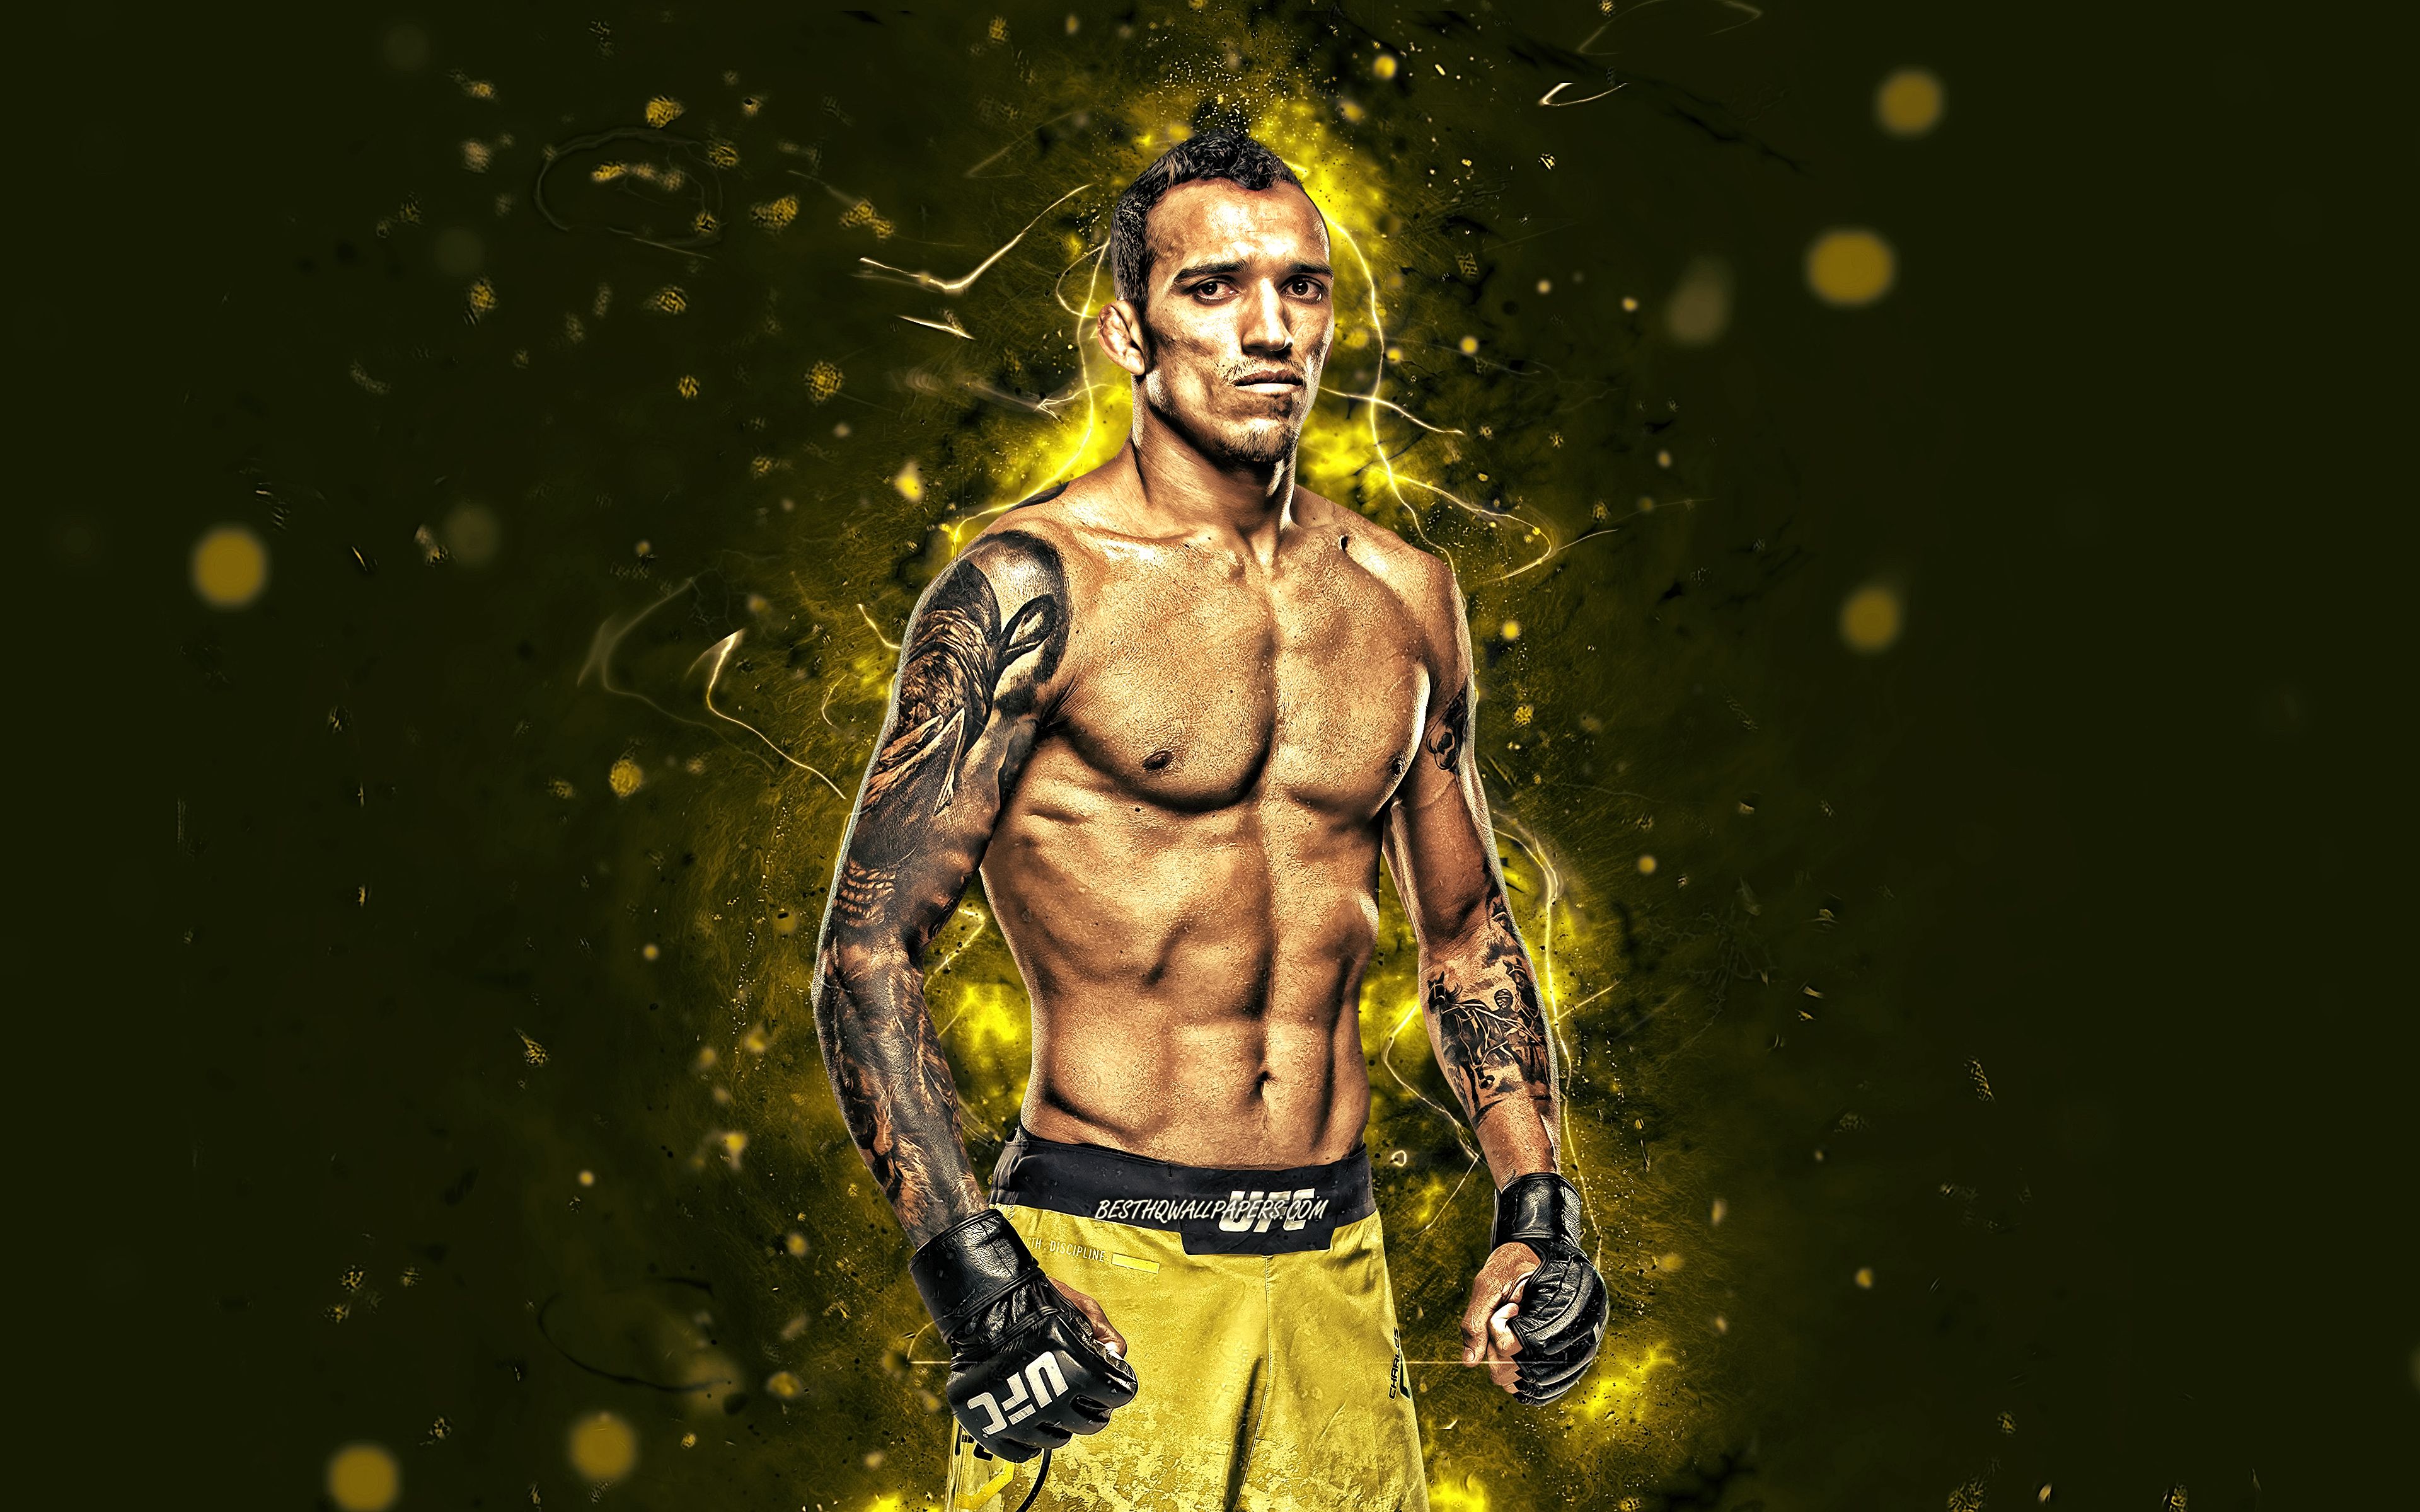 Download wallpaper Charles Oliveira, 4k, yellow neon lights, Brazilian fighters, MMA, UFC, female fighters, Mixed martial arts, Charles Oliveira 4K, UFC fighters, MMA fighters, Charles Oliveira da Silva for desktop with resolution